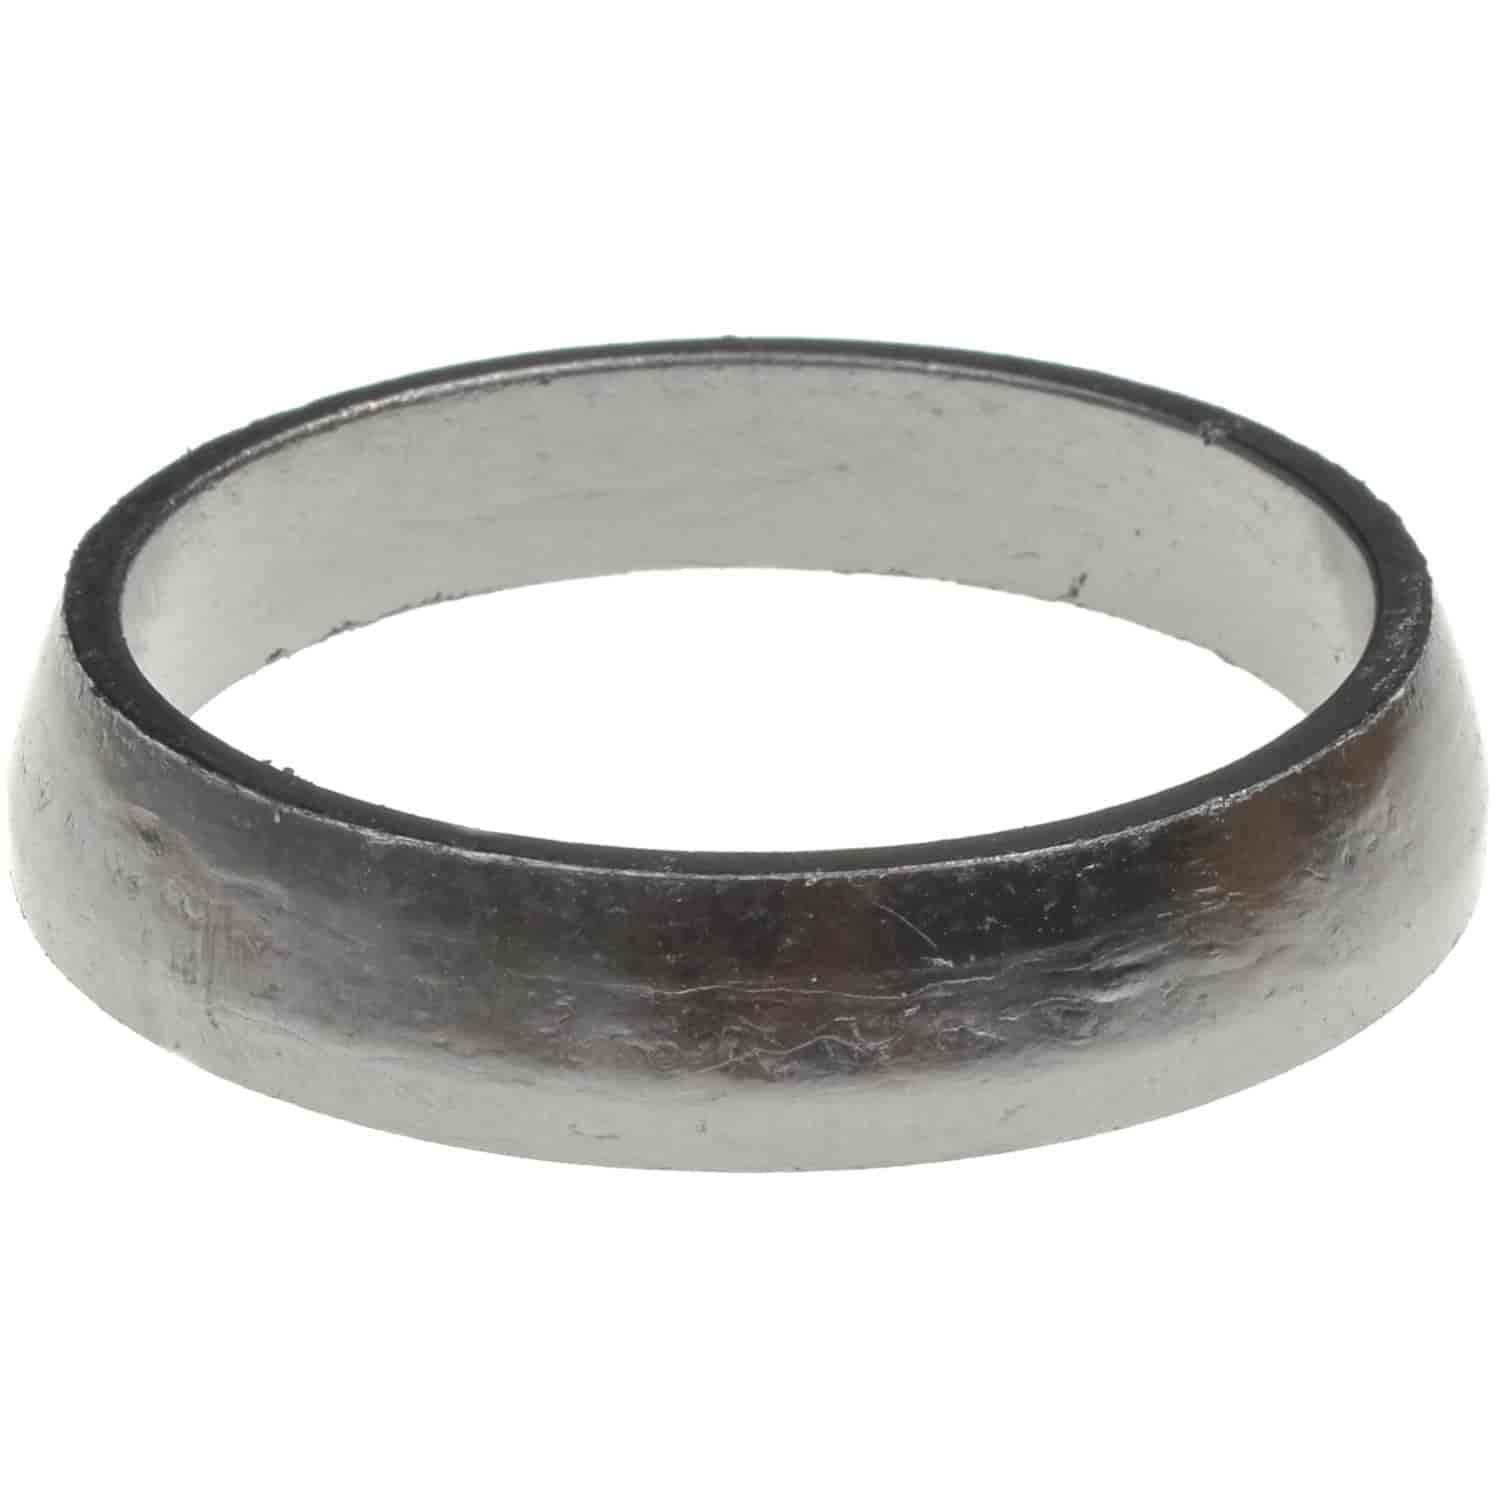 Exhaust Pipe Packing Ring Jeep 242 4.0L 91-95 Donut